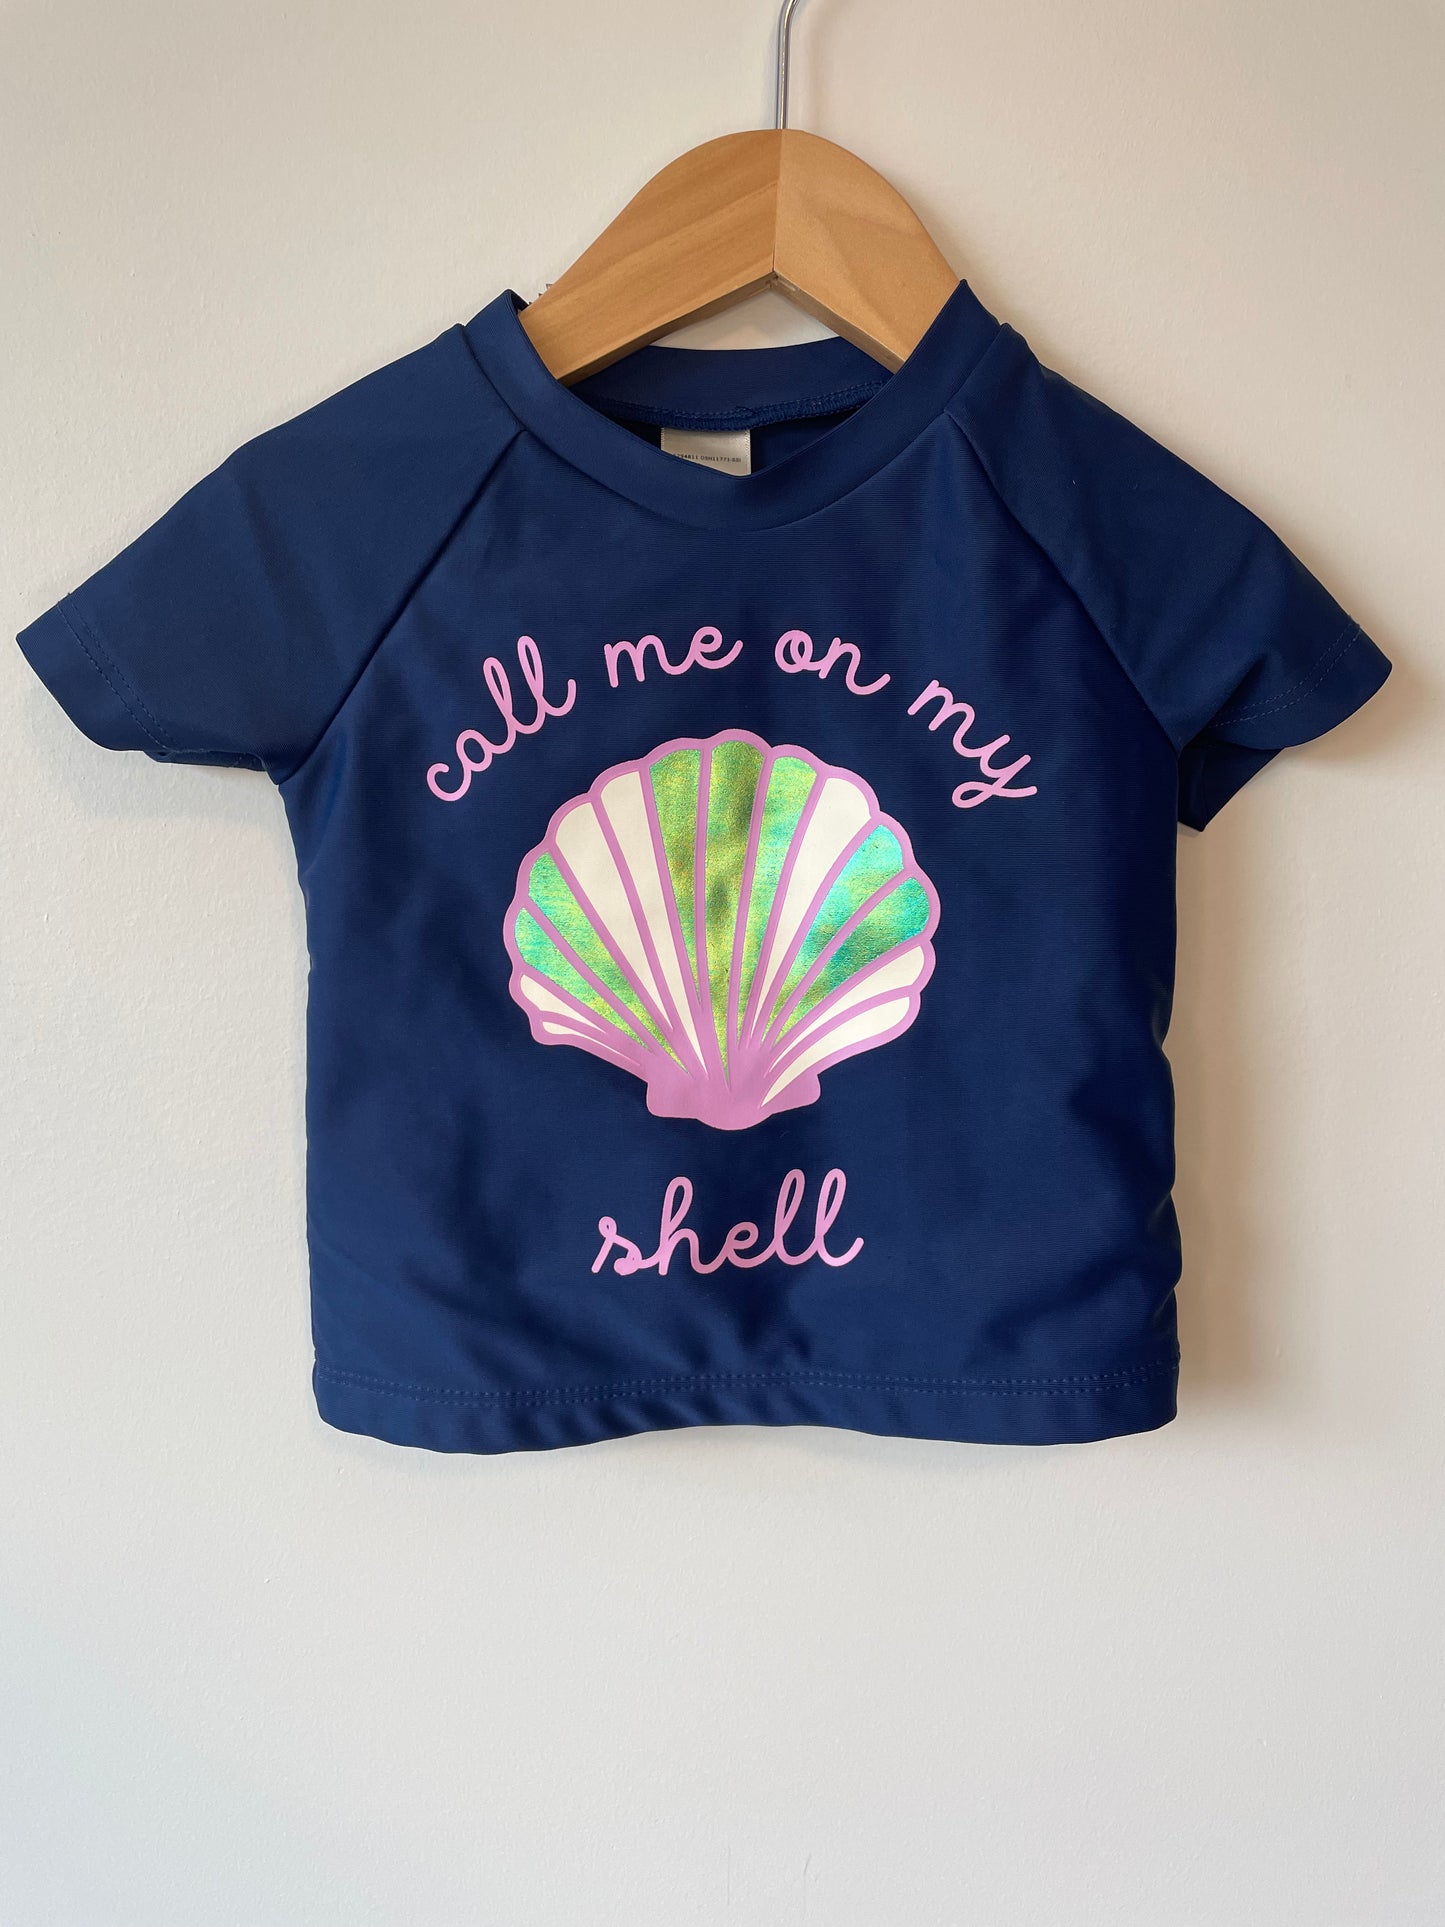 Call Me on My Shell Two Piece Swimsuit / 12m